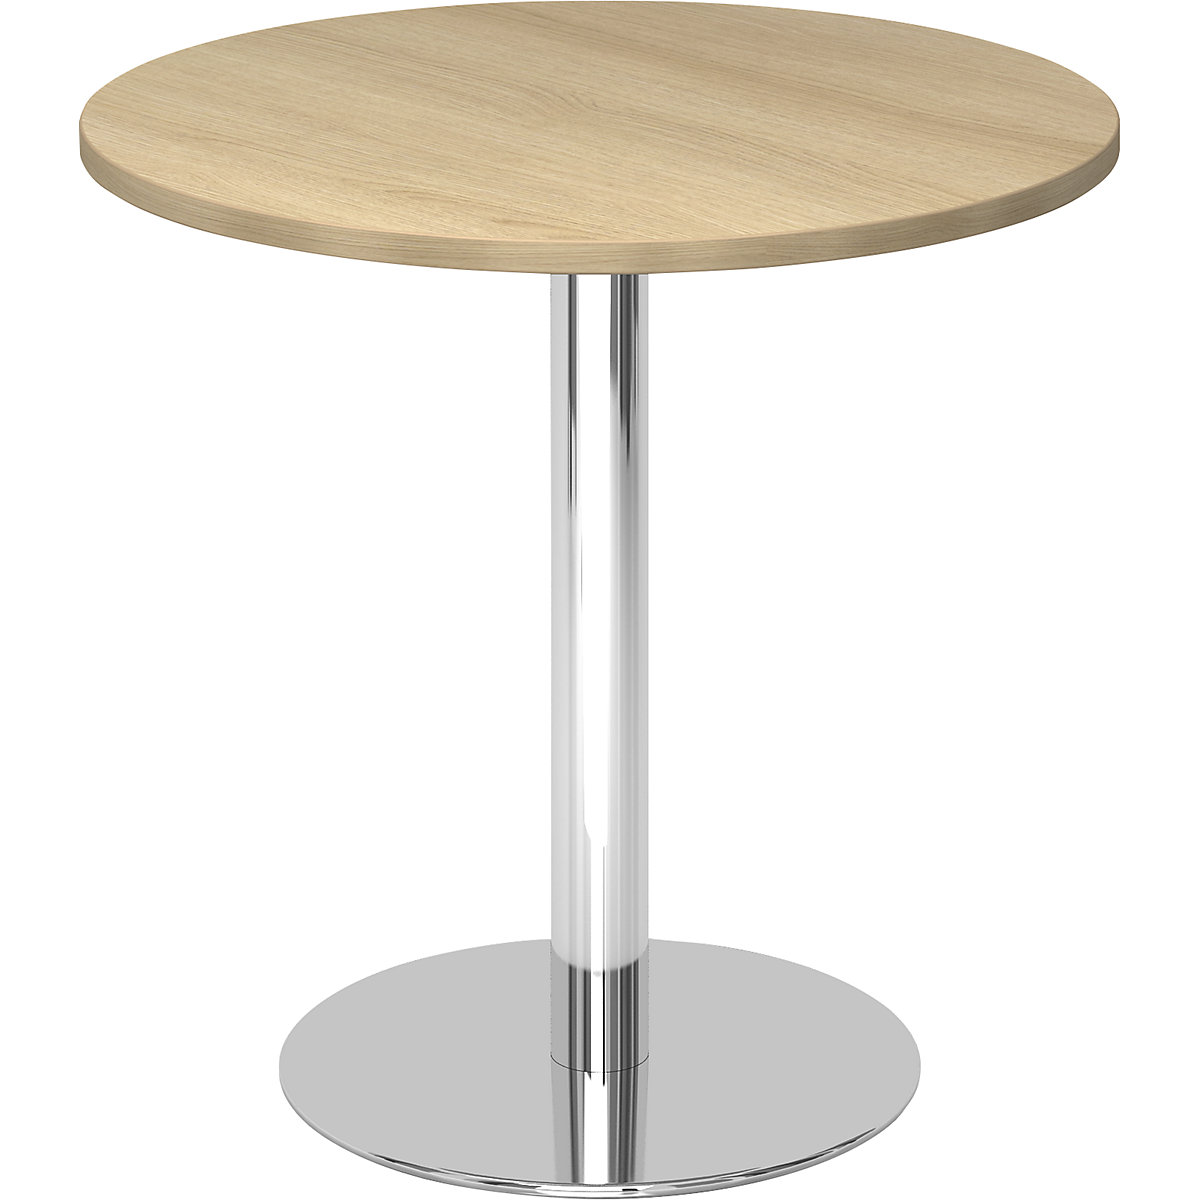 Conference table, Ø 800 mm, 755 mm high, chrome plated frame, tabletop in oak finish-7